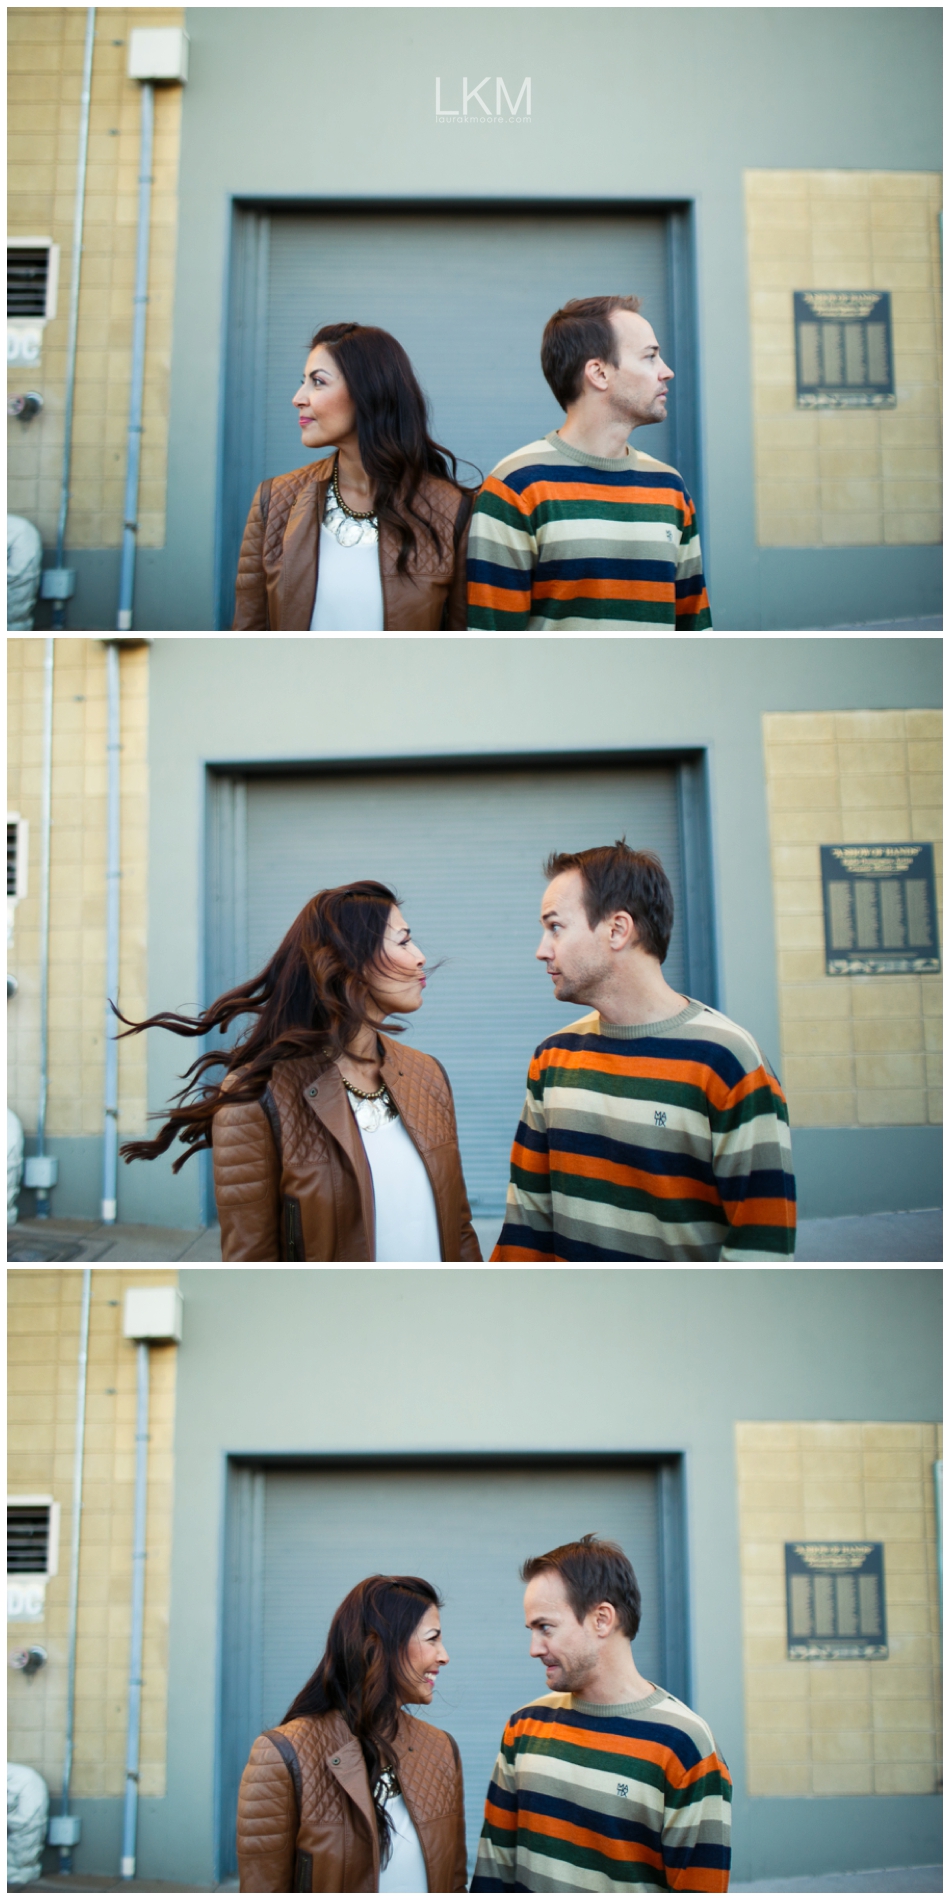 st-philipps-tucson-classy-engagement-session-laura-k-moore-photography_0032.jpg